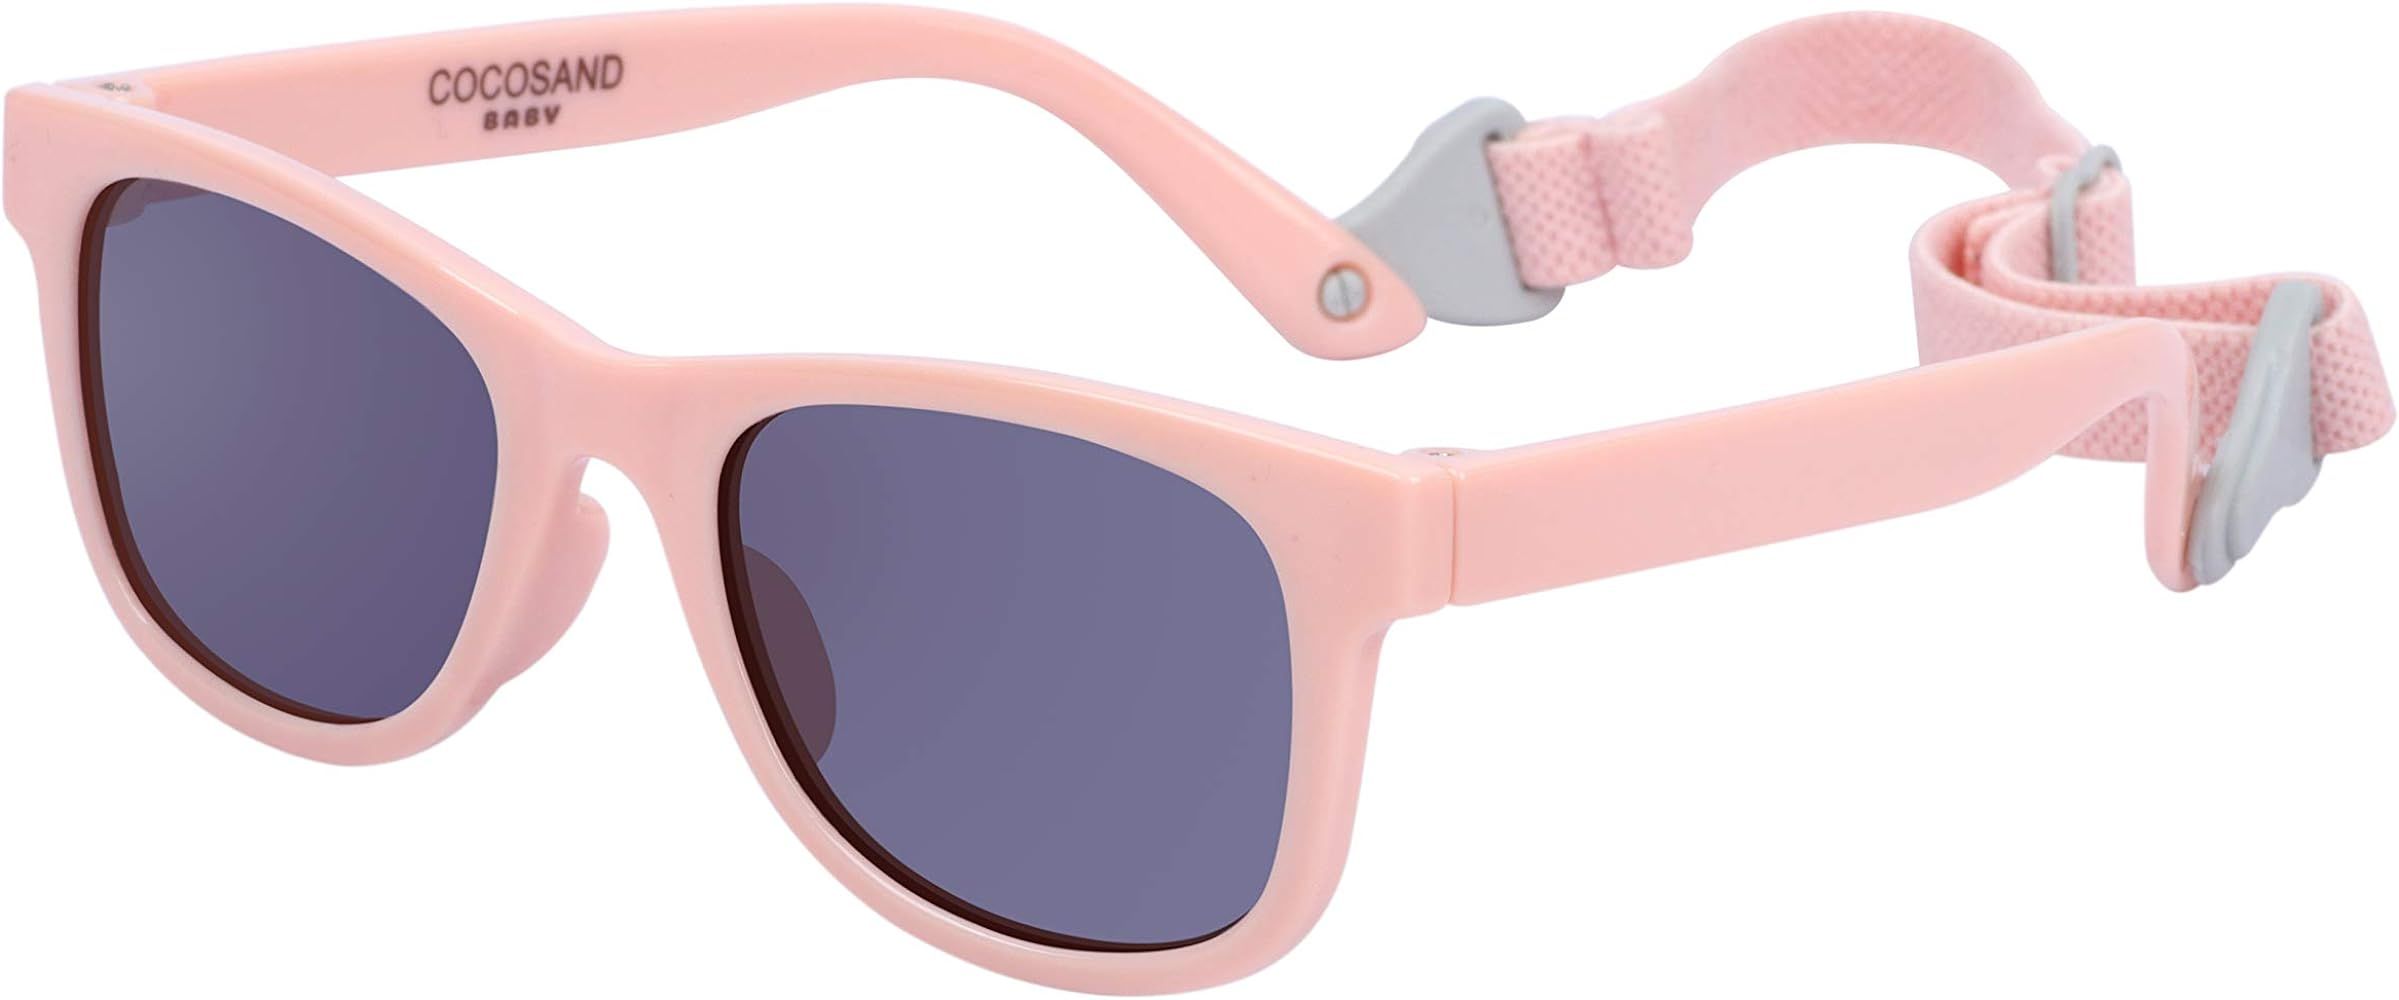 COCOSAND Baby Sunglasses with Strap | Amazon (US)